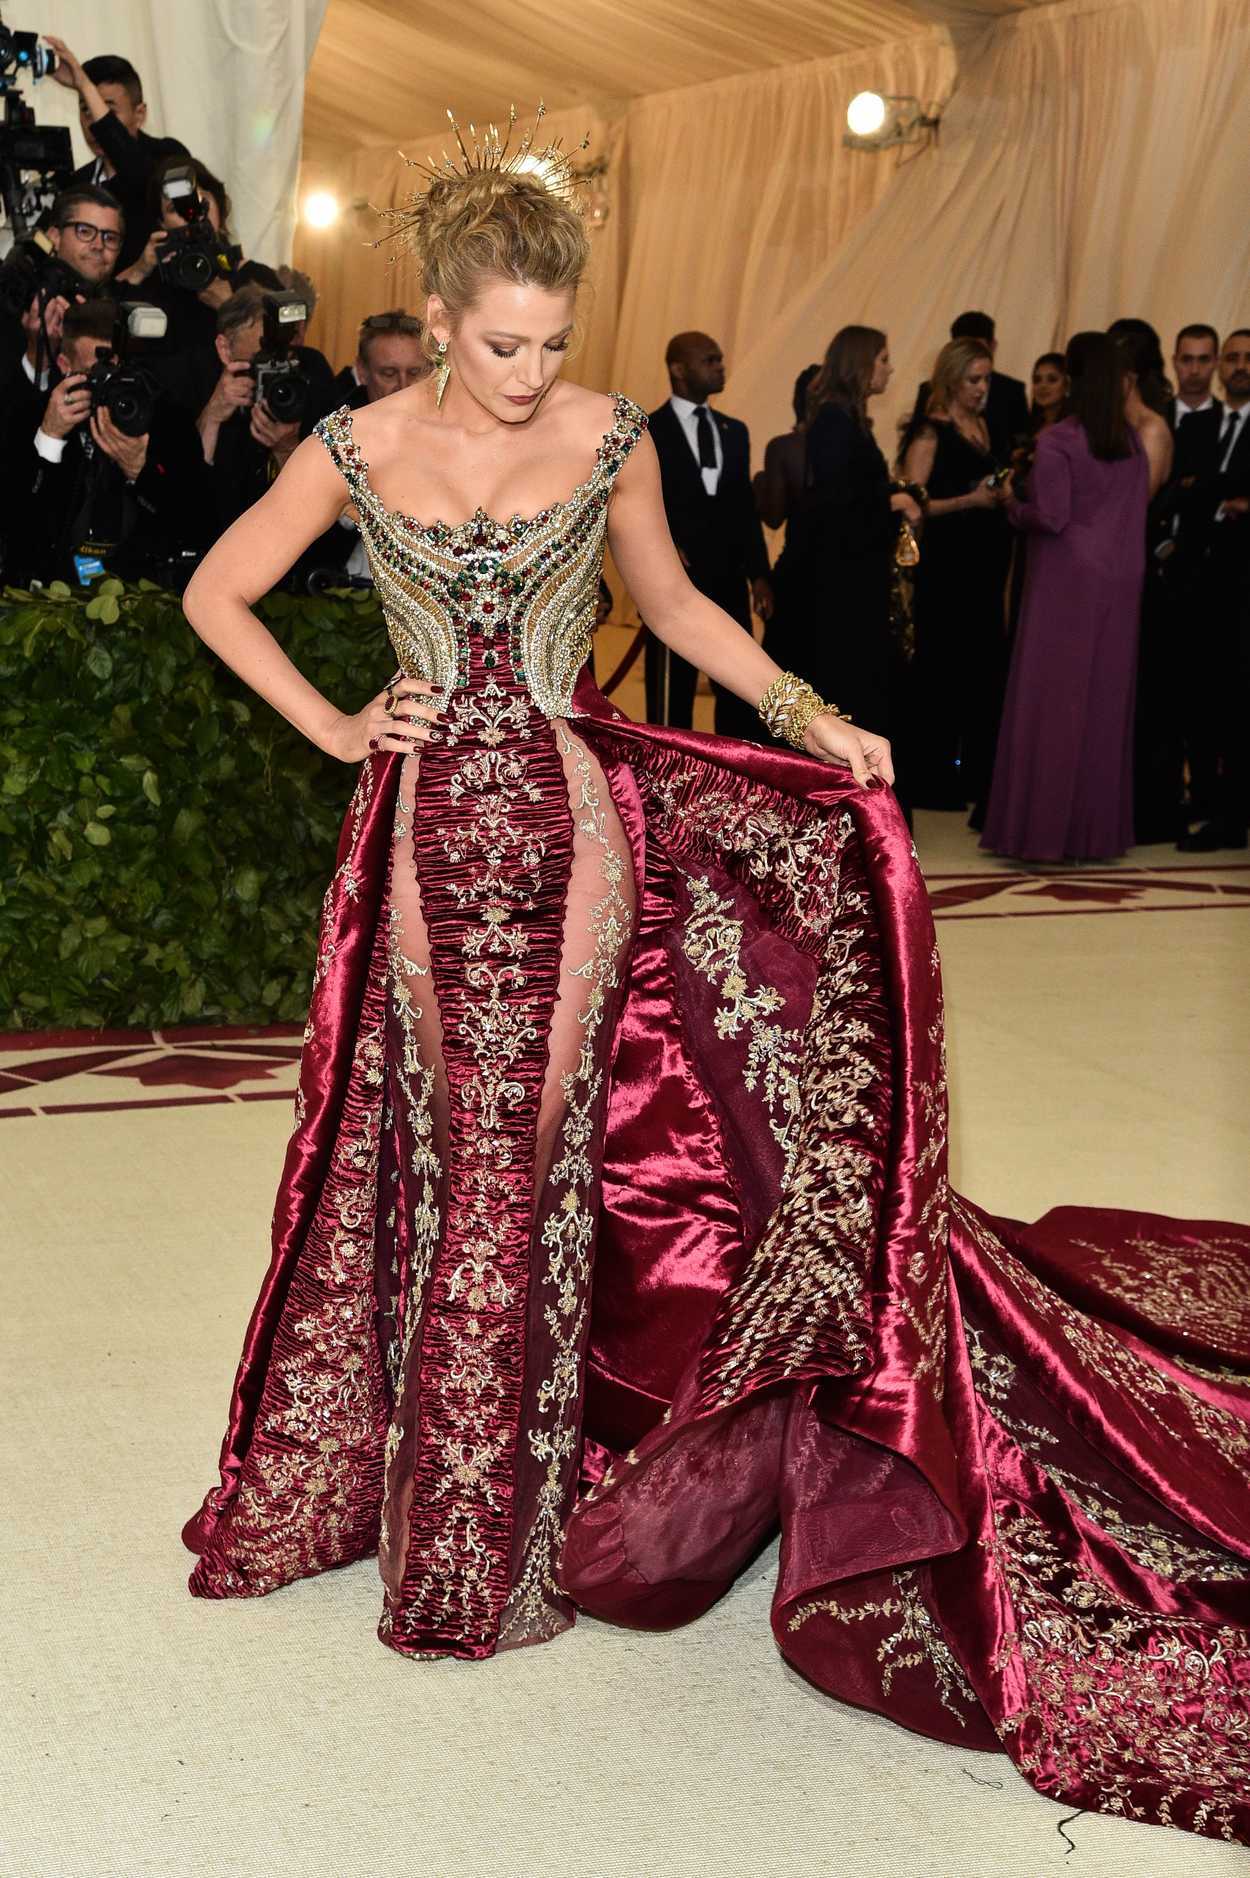 Blake Lively at the Heavenly Bodies: Fashion and The Catholic